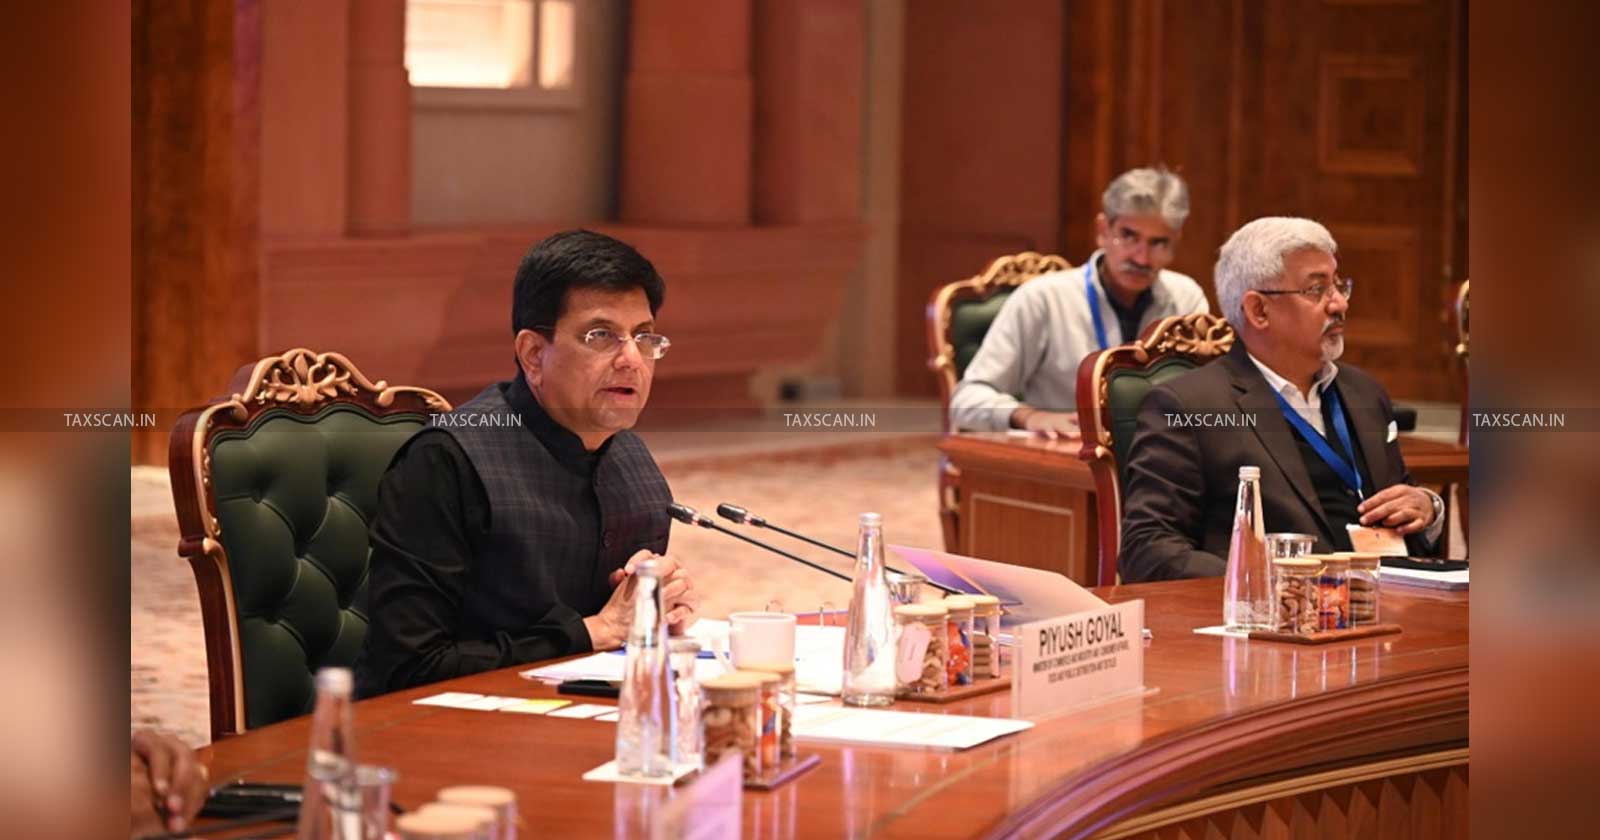 Commerce and Industry Minister Piyush Goyal announces Commencement of Work on Trade Connect ePlatform - TAXSCAN